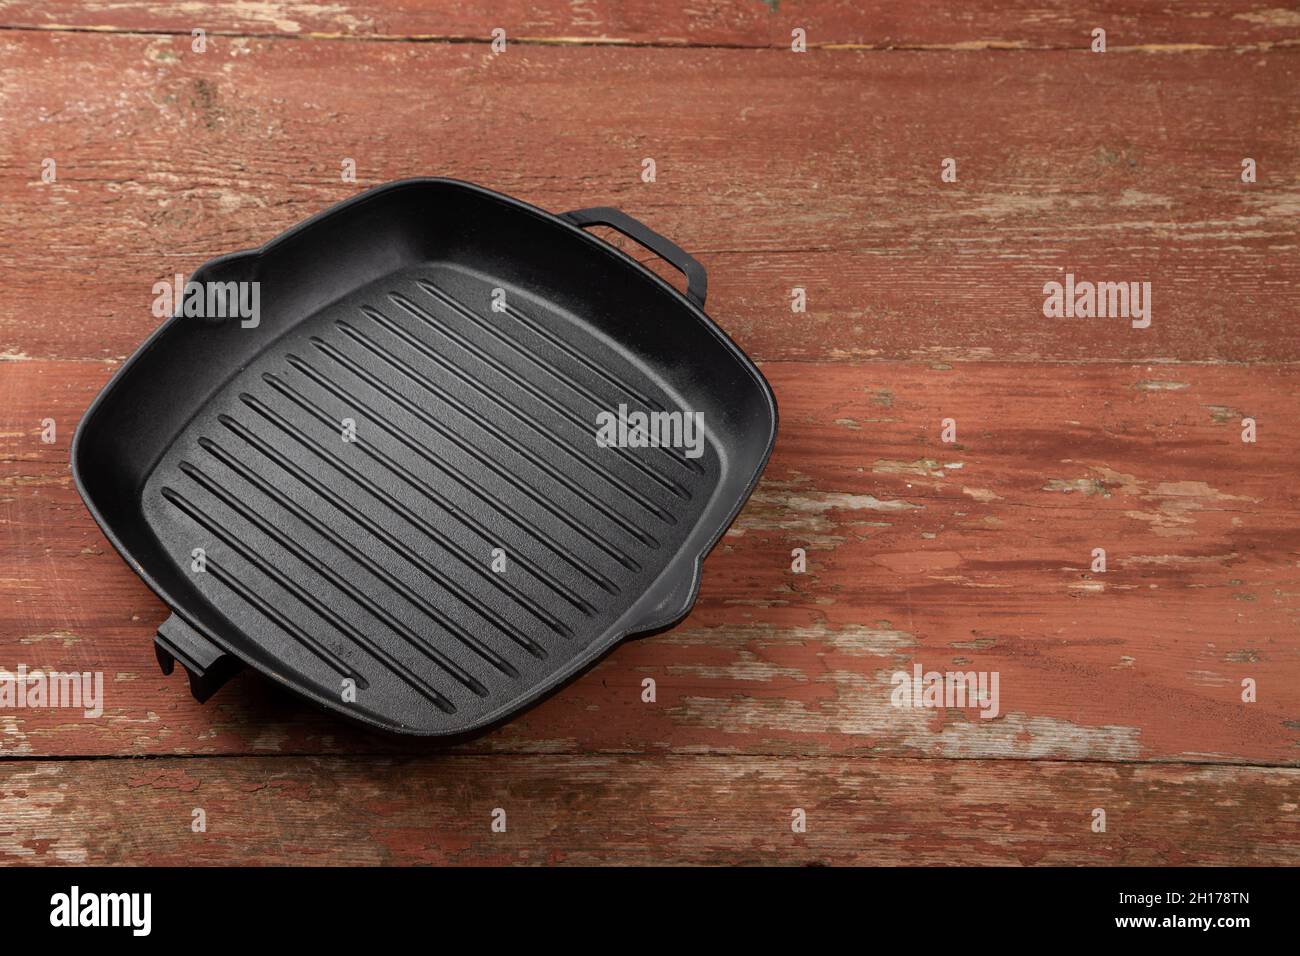 https://c8.alamy.com/comp/2H178TN/an-empty-black-cast-iron-grill-pan-for-cooking-delicious-meat-wood-background-space-for-text-top-view-2H178TN.jpg